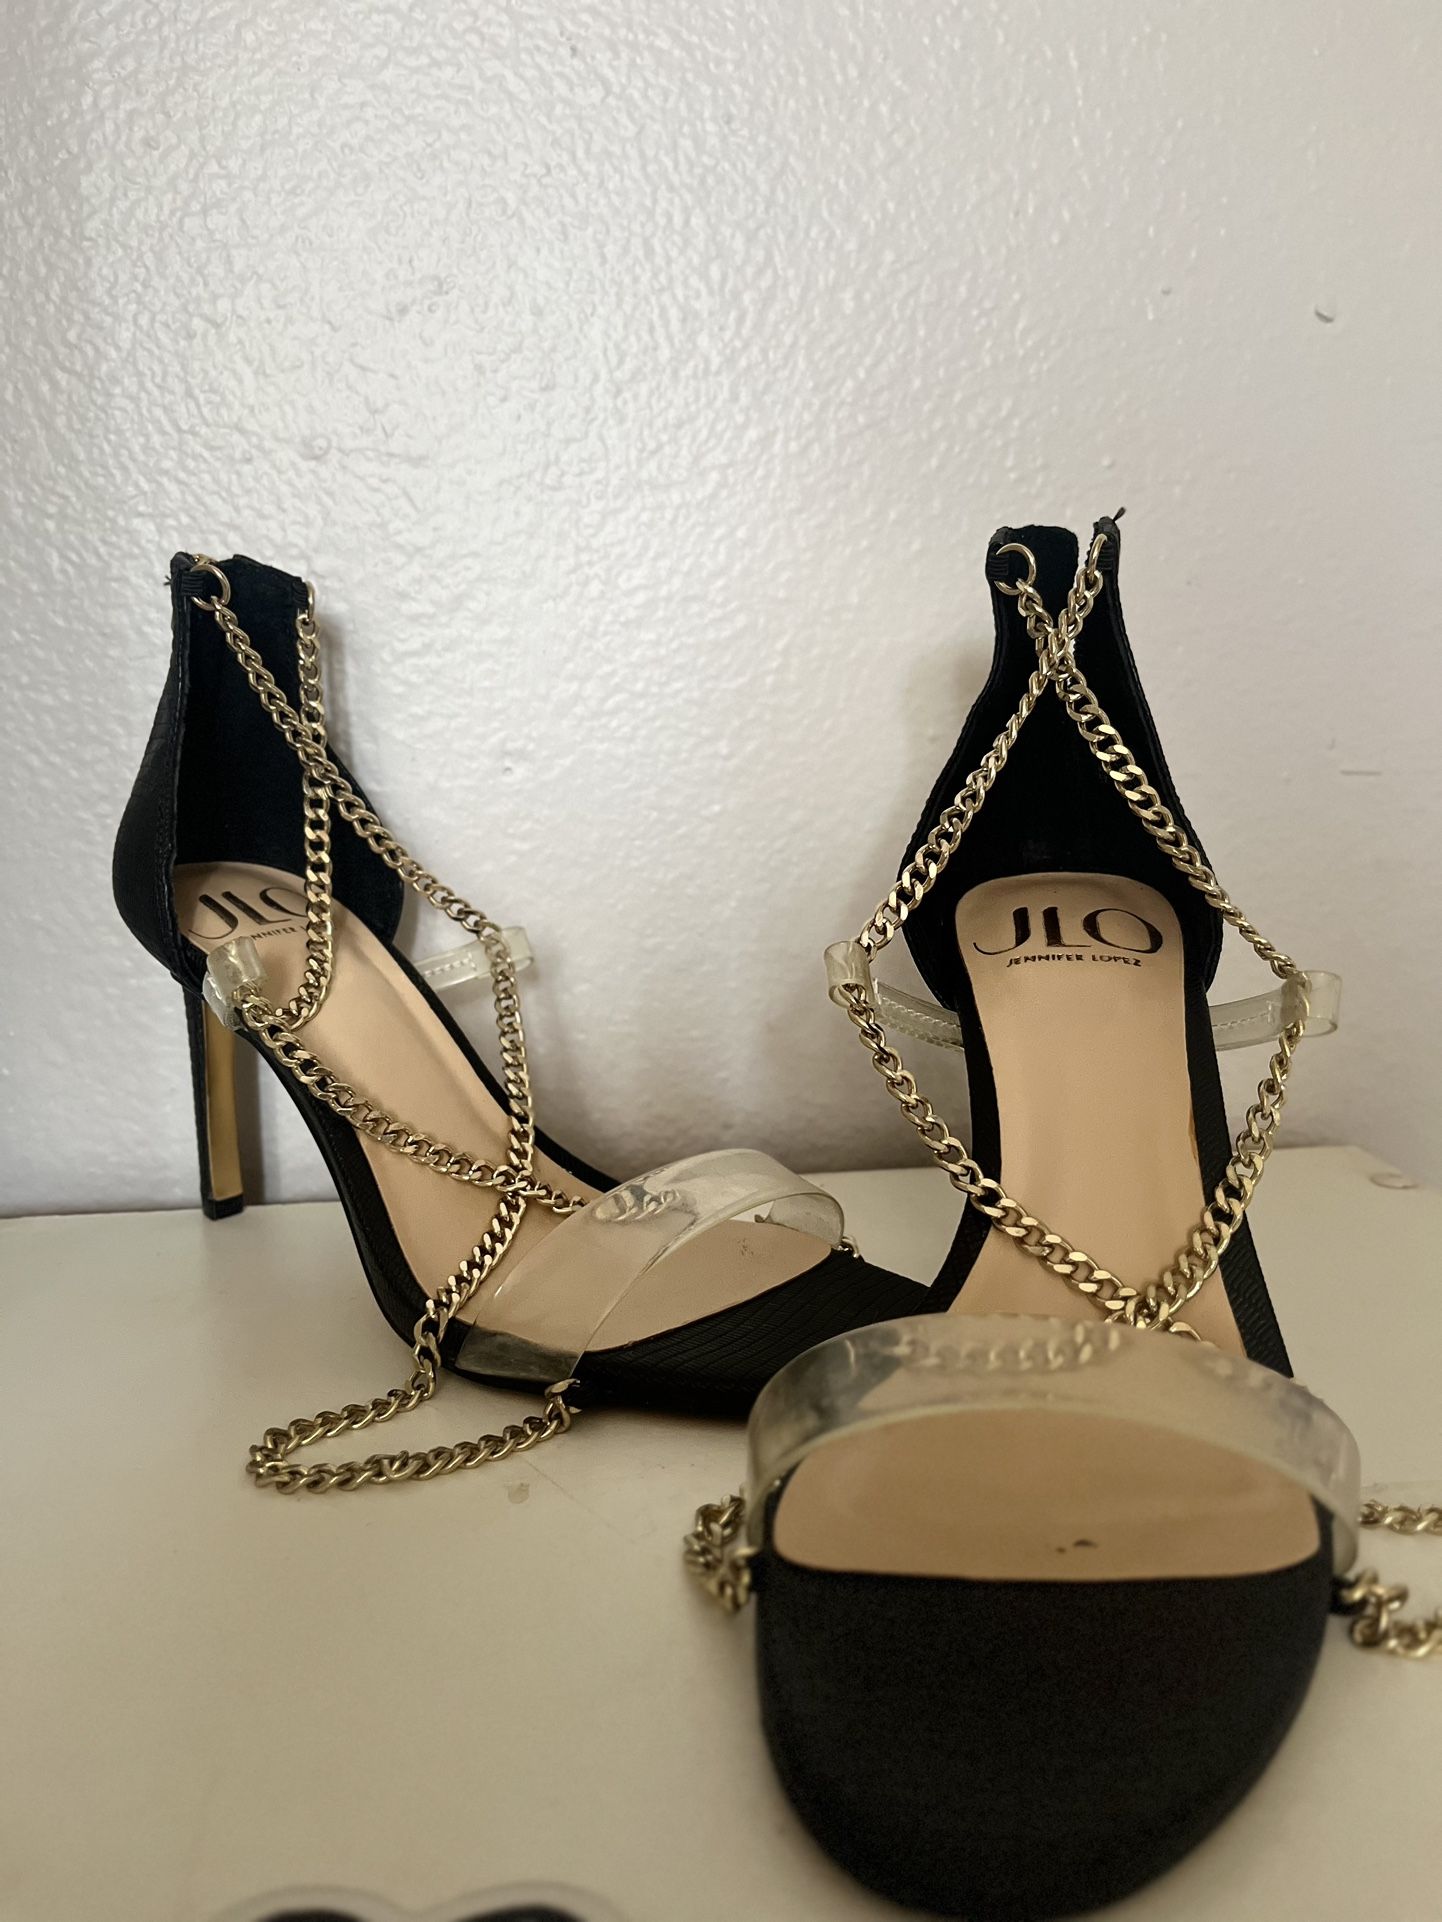 JLO black heels with gold chain